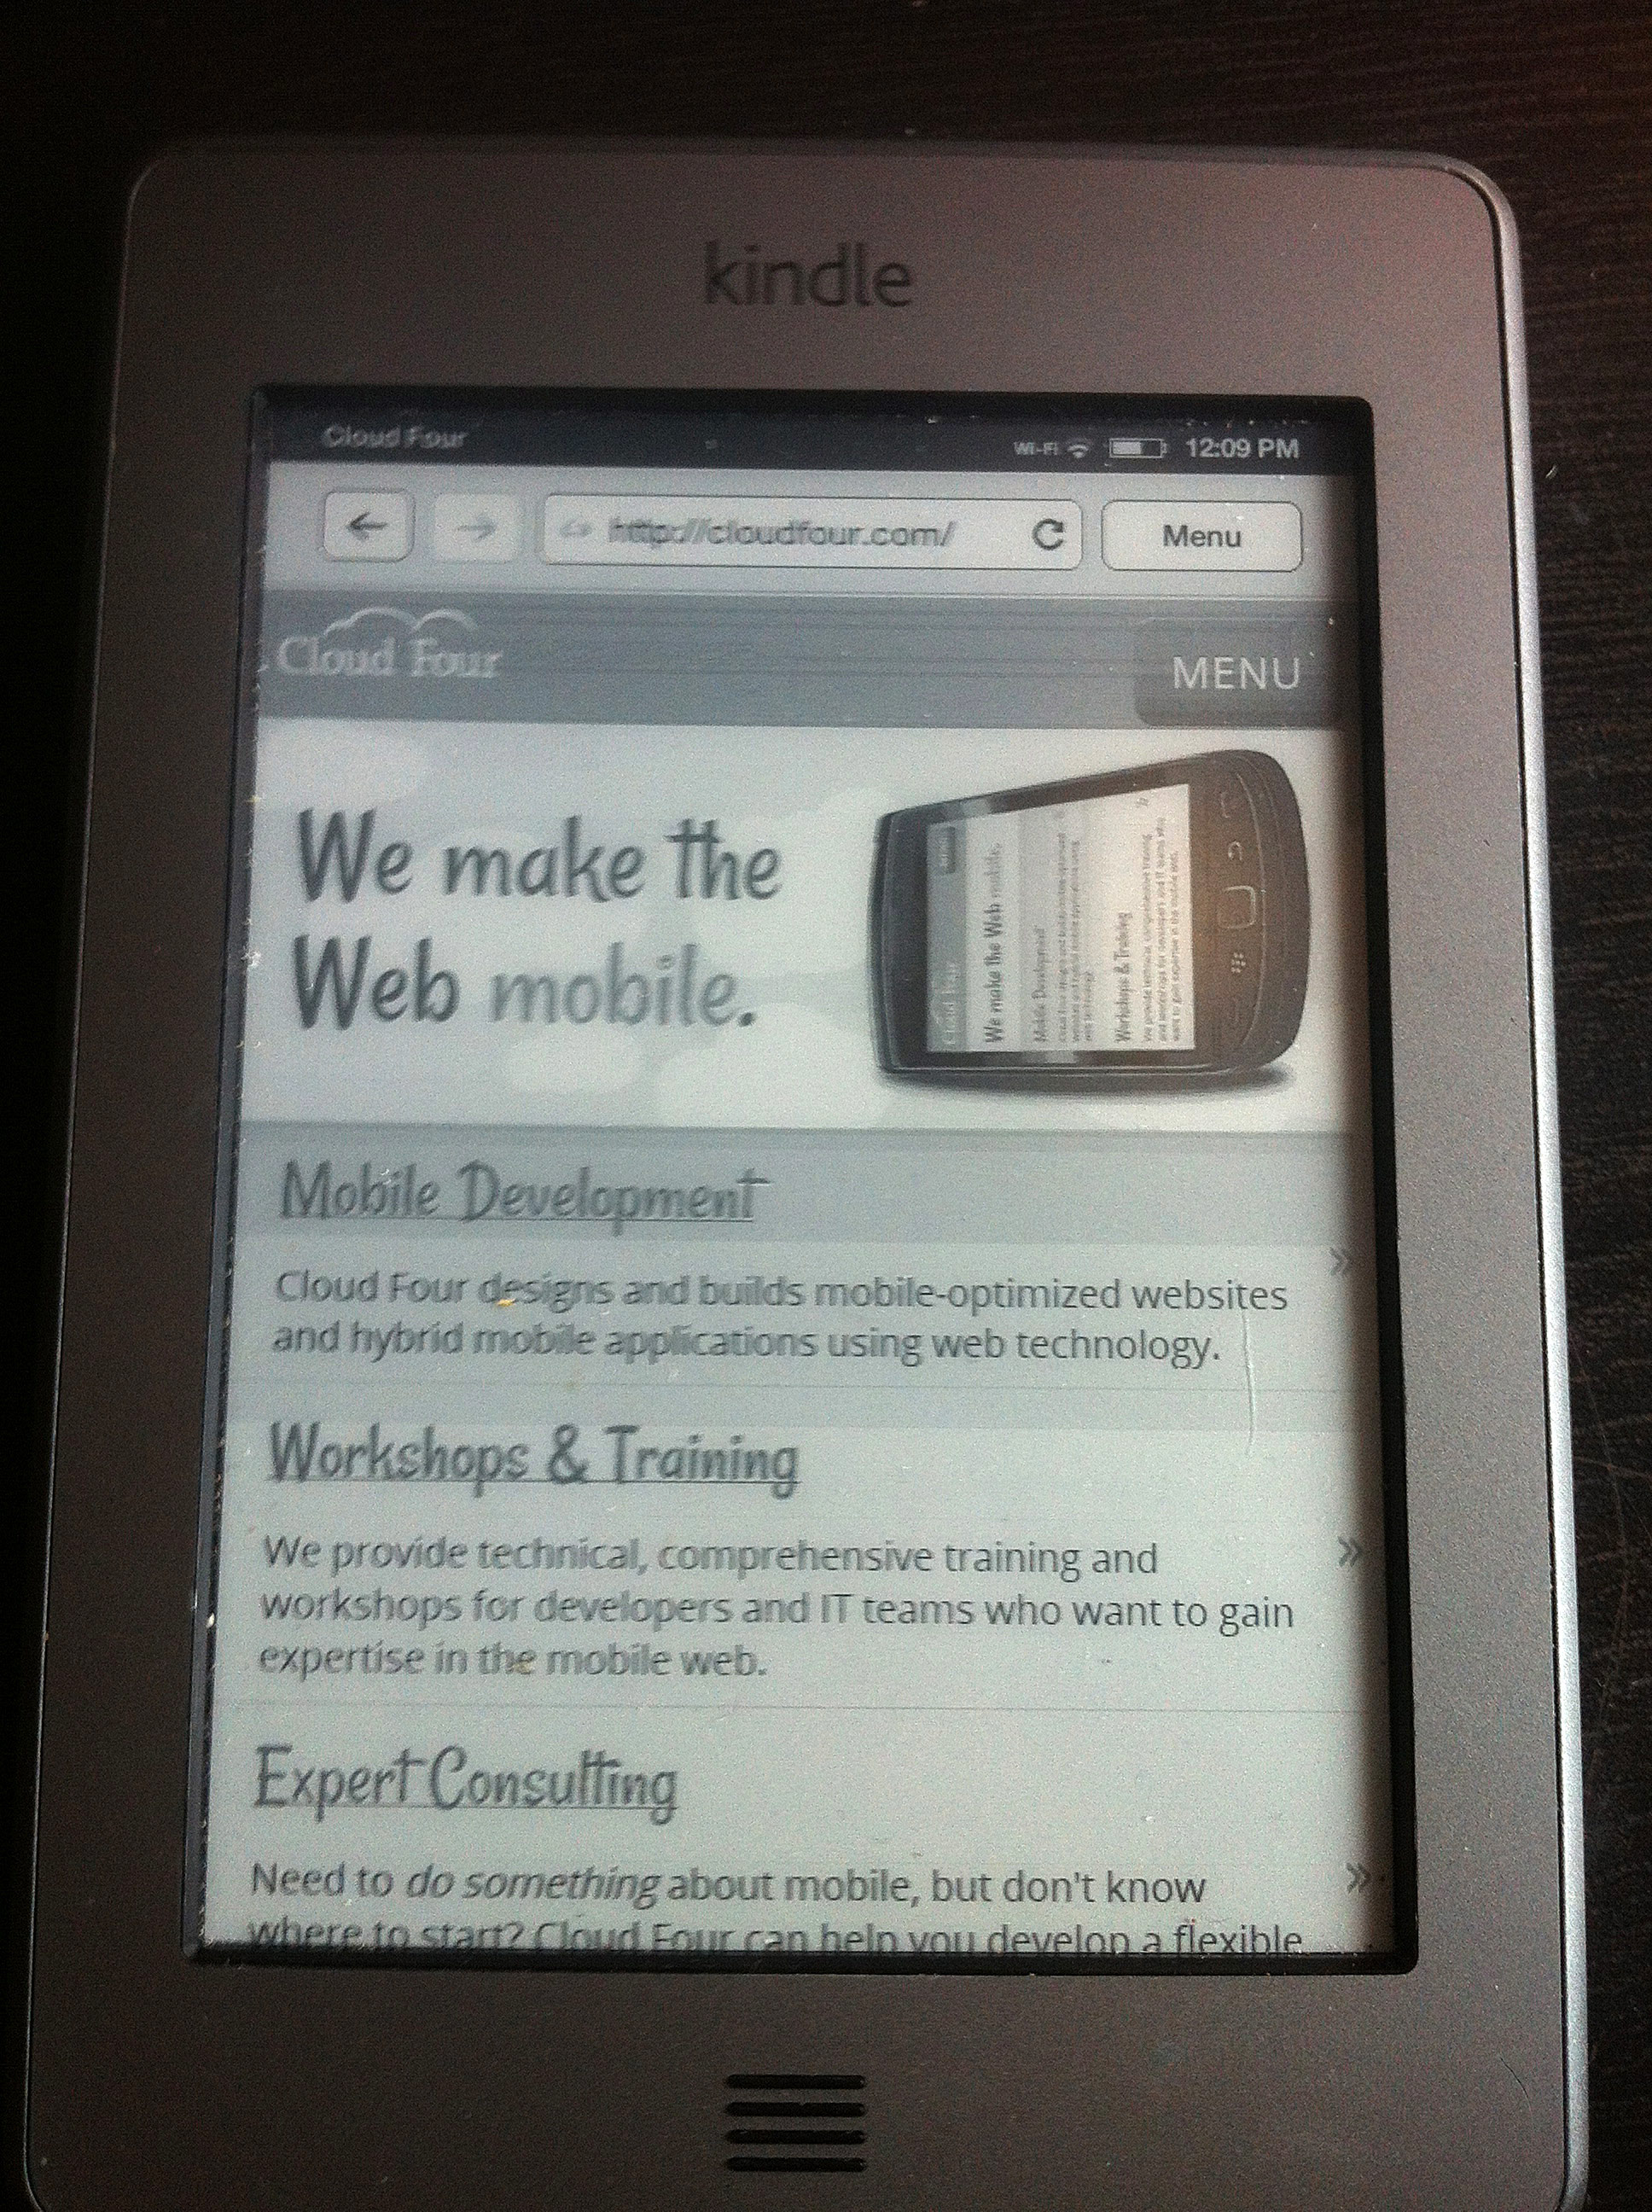 Our site looks tolerable on a Kindle Touch. That's about as good as it's going to get on that browser.